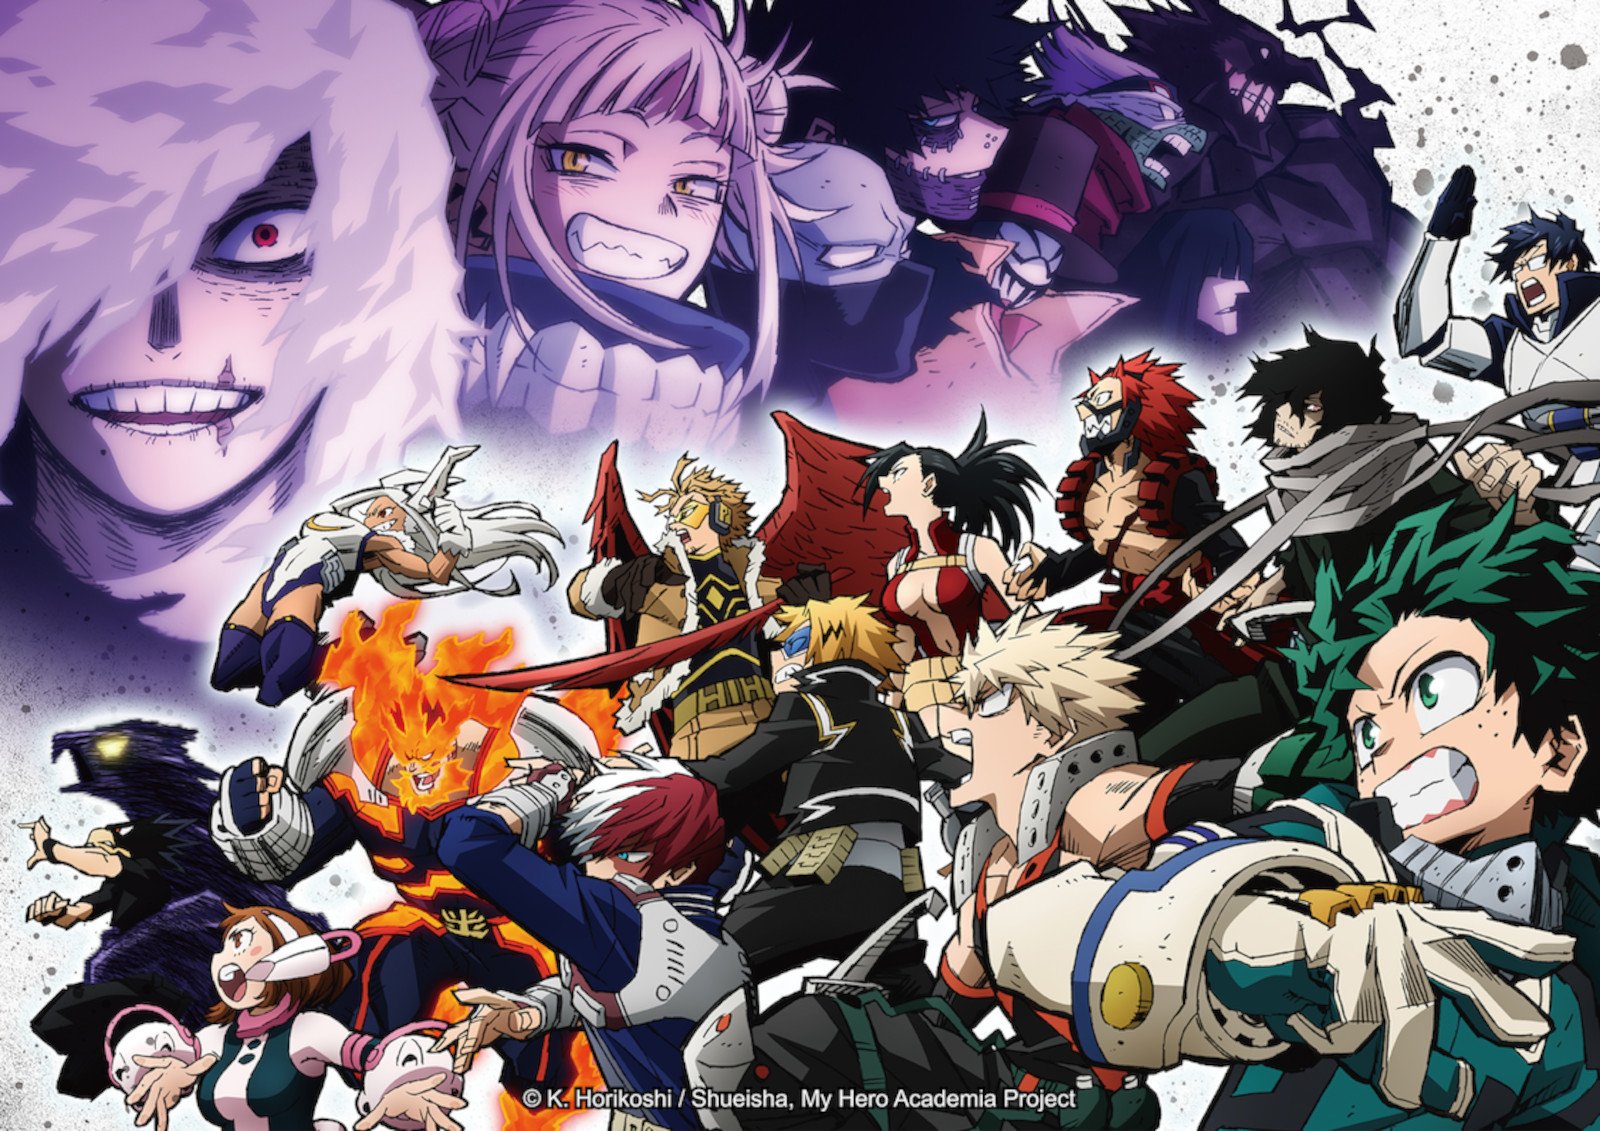 Key art for 'My Hero Academia' Season 6 for our article about who Dabi is. It shows the Pro Heroes charging into battle with the villains looming overhead.